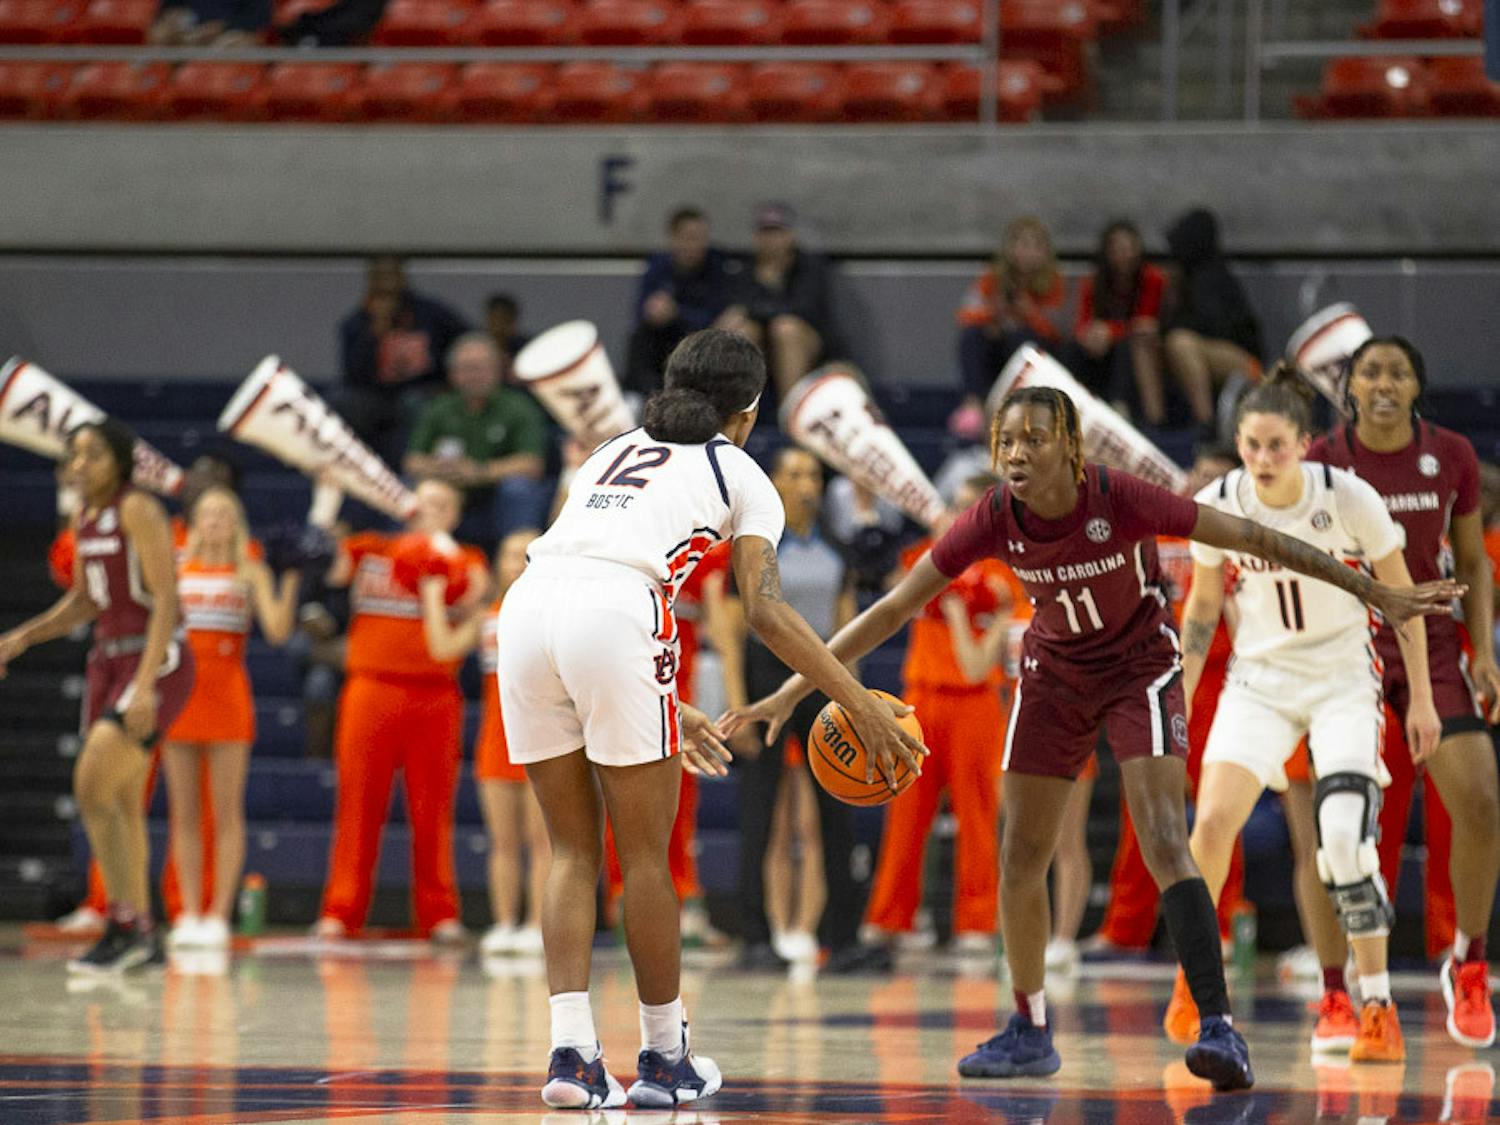 Freshman guard Talaysia Cooper guards one of Auburn's players during the game against the Tigers on Feb. 9, 2023. The Gamecocks took a record-setting win, besting the Tigers 83-48 for their 30th victory in a row.